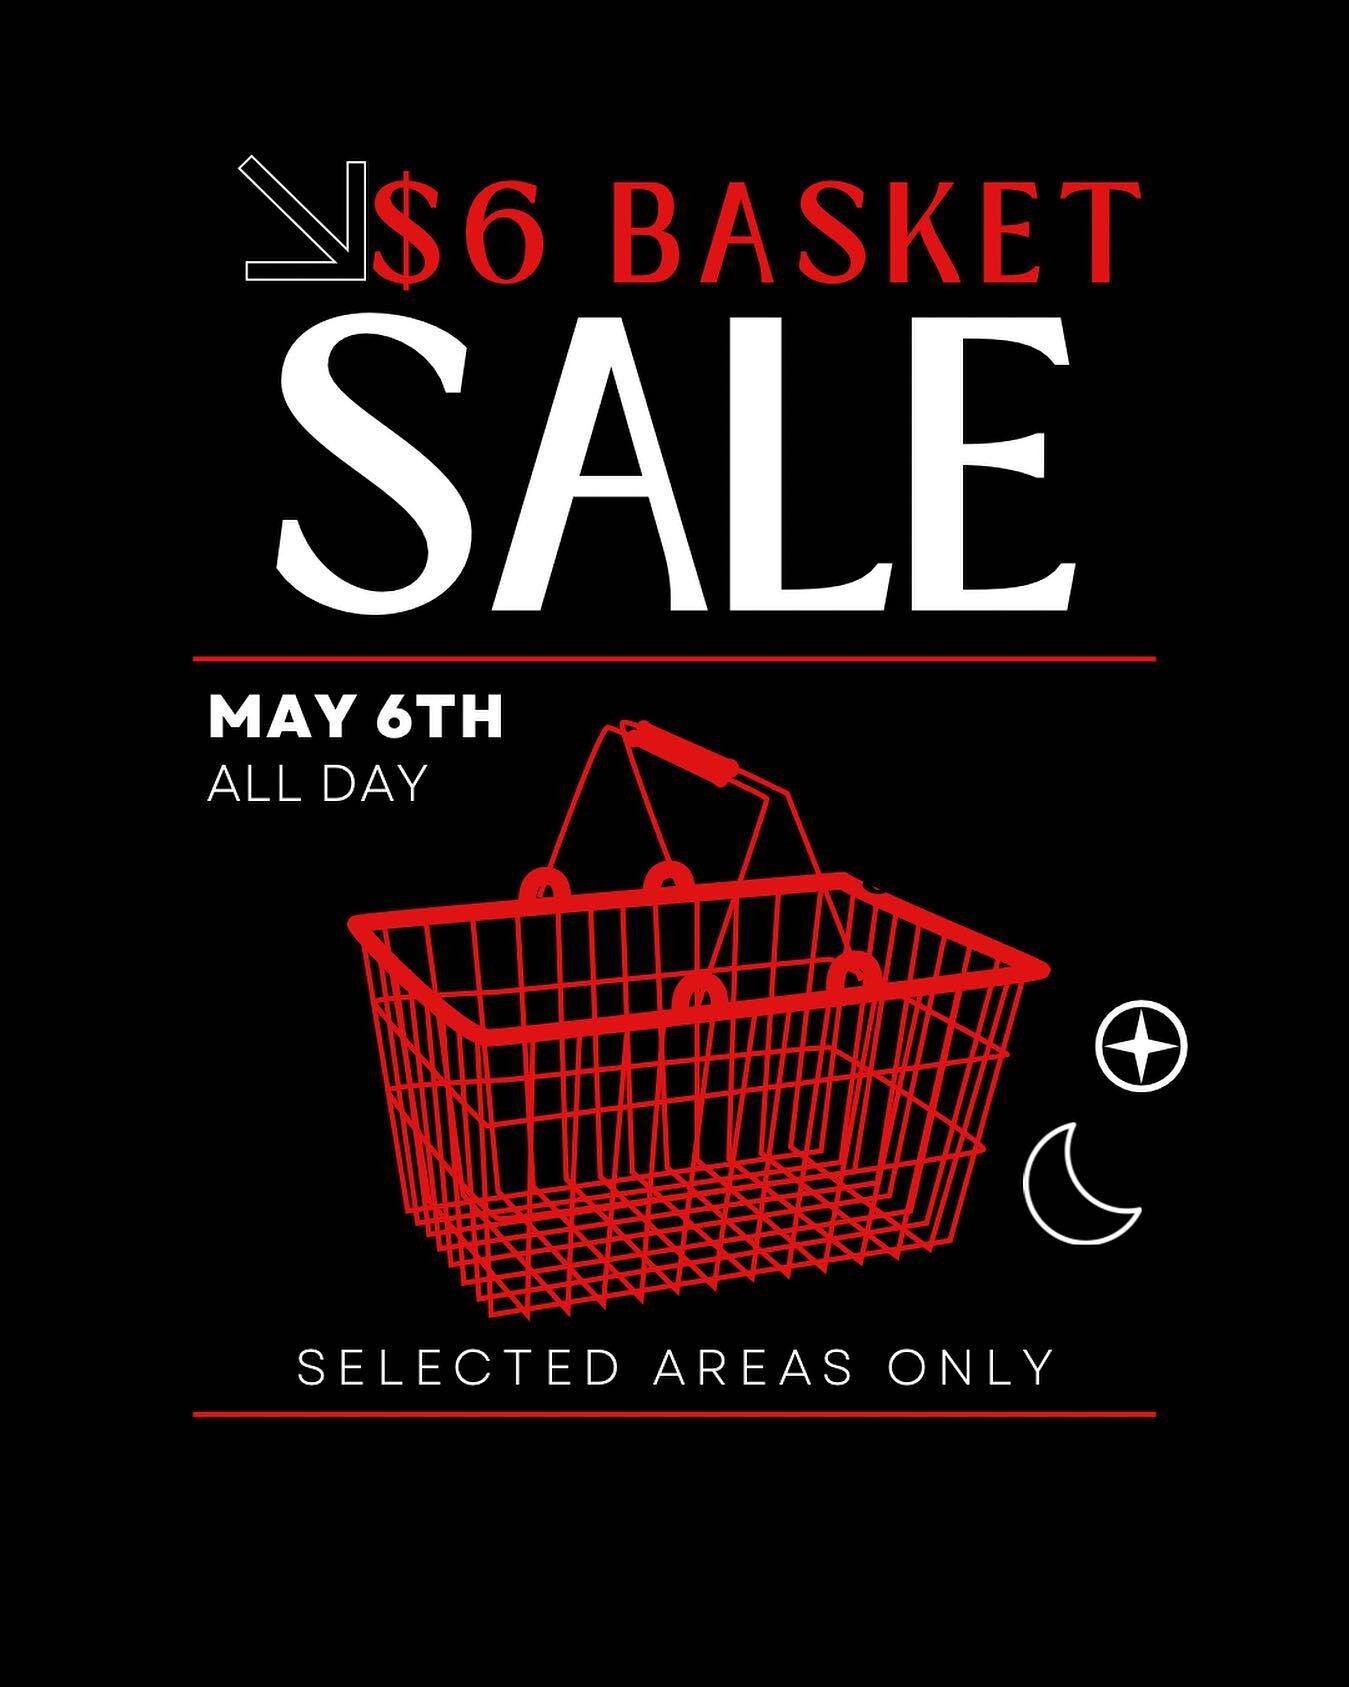 Sale today!!!!!